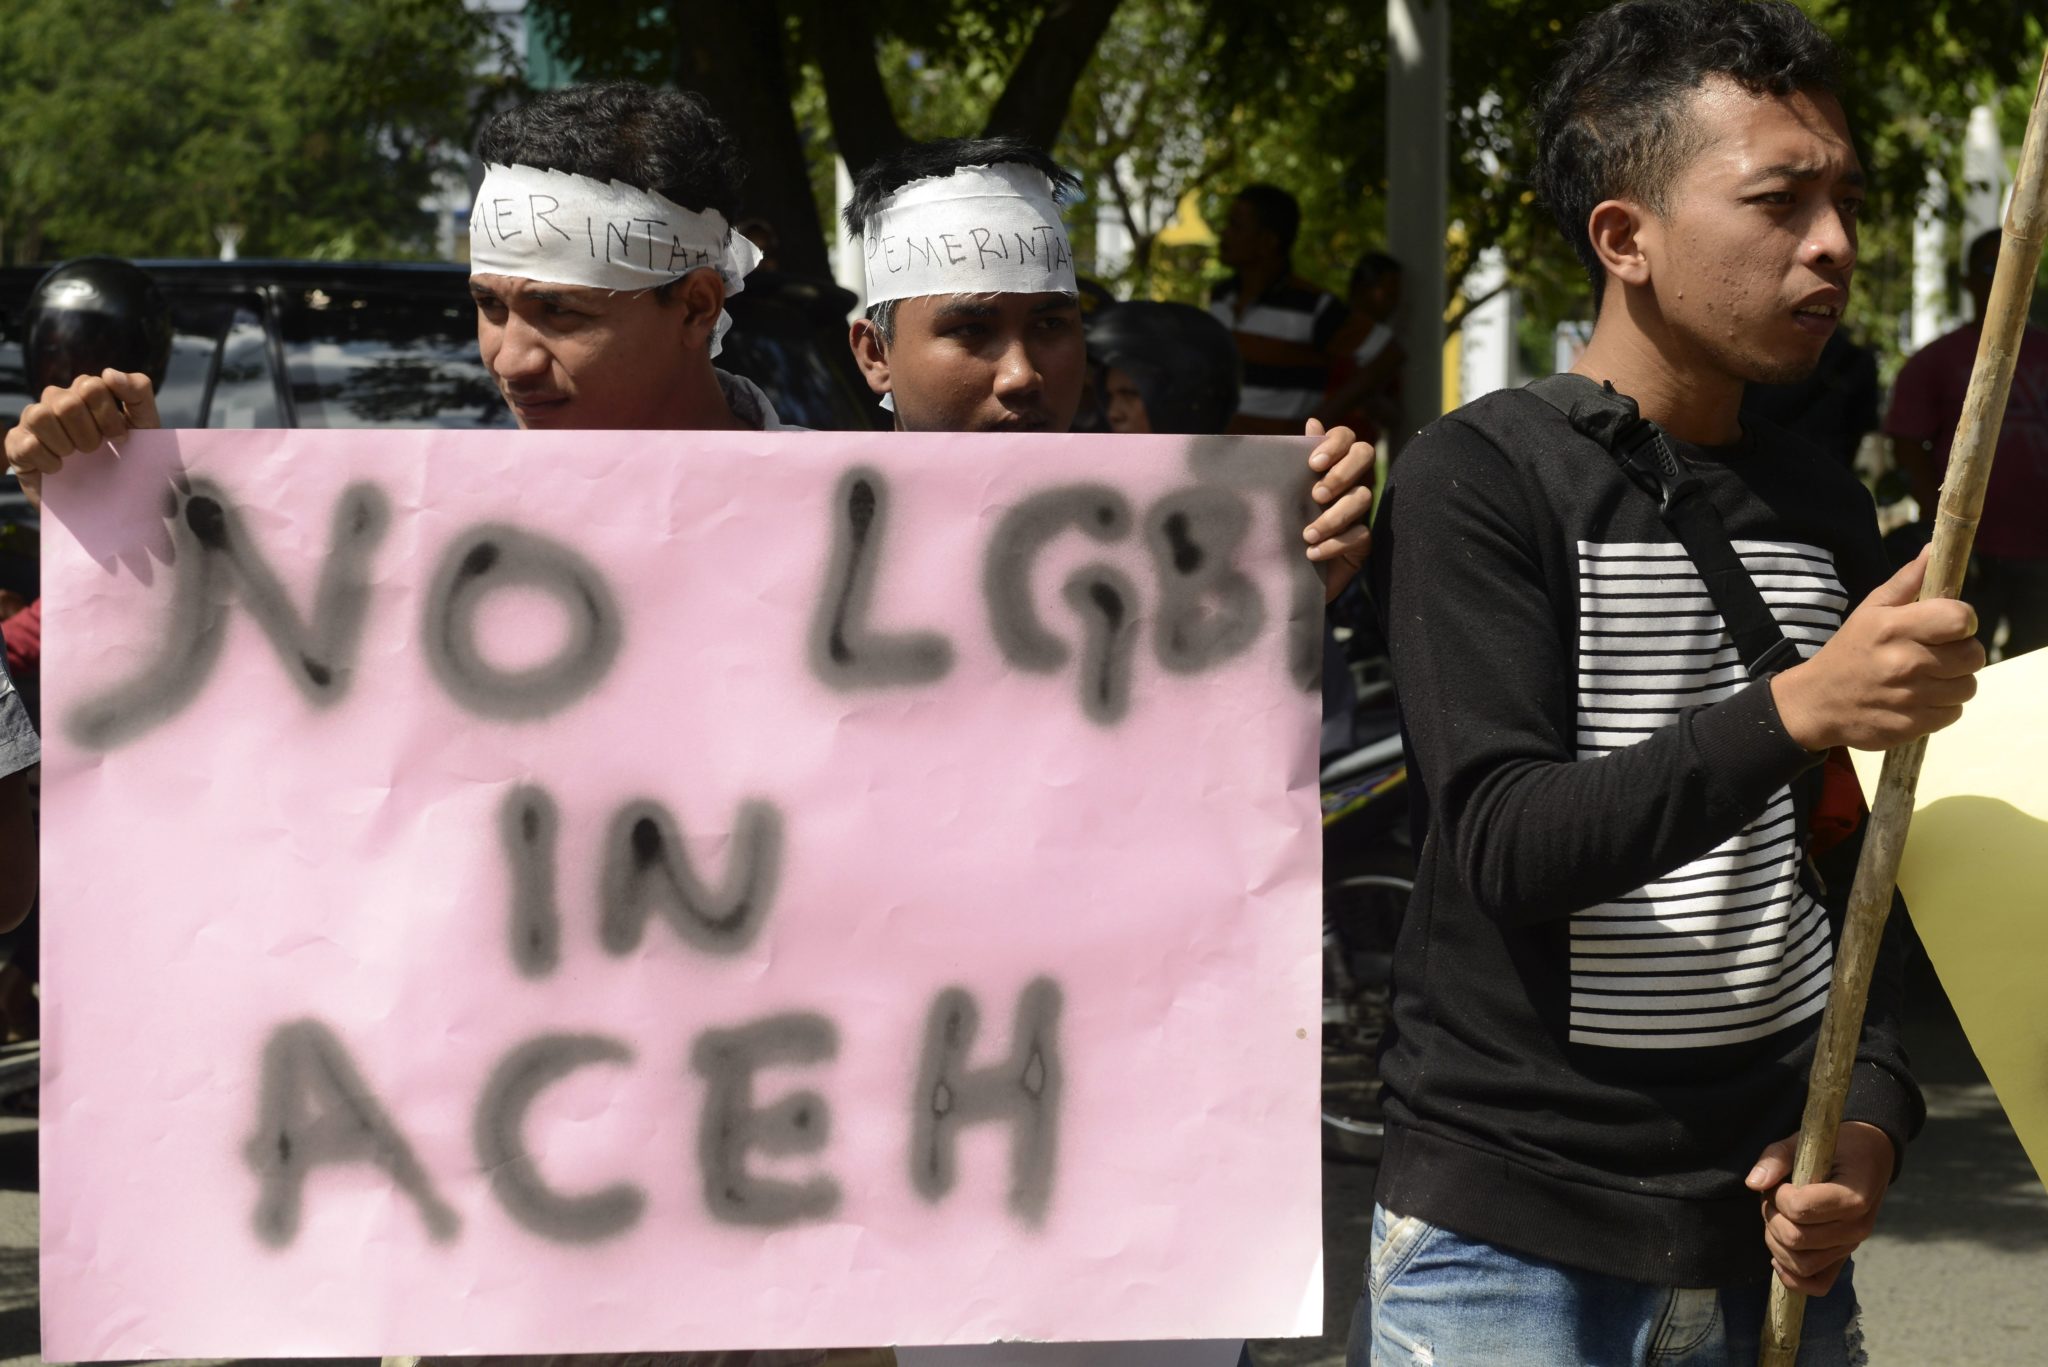 Indonesia: Police arrests and attempts to ‘re-educate’ transgender people must end